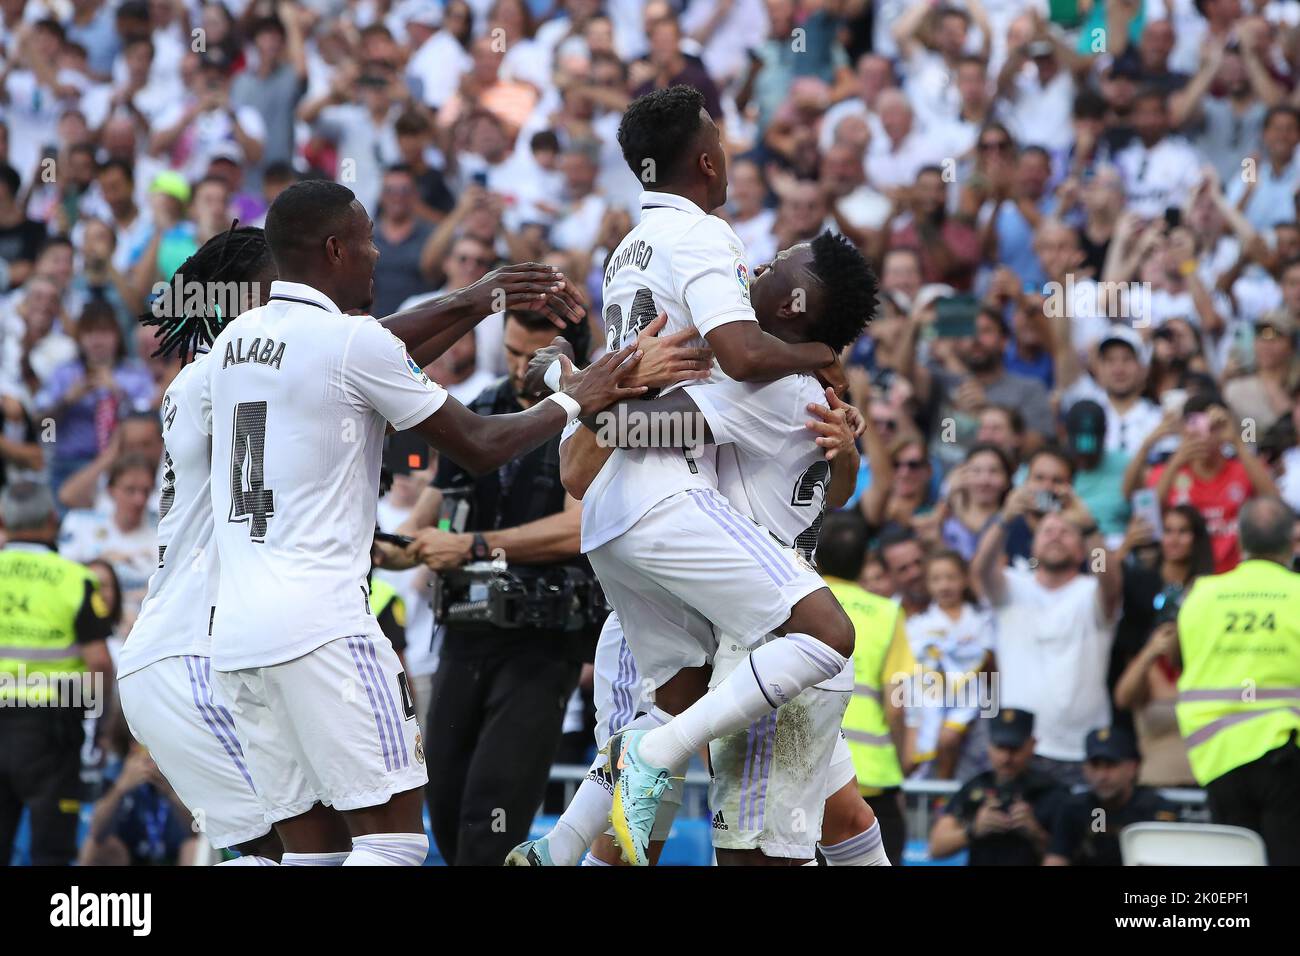 Madrid, Spain. 11th September, 2022. Real Madrid players celebrate during La Liga match day 5 between Real Madrid and Mallorca at Santiago Bernabeu Stadium in Madrid, Spain, on September 11, 2022. Credit: Edward F. Peters/Alamy Live News Stock Photo